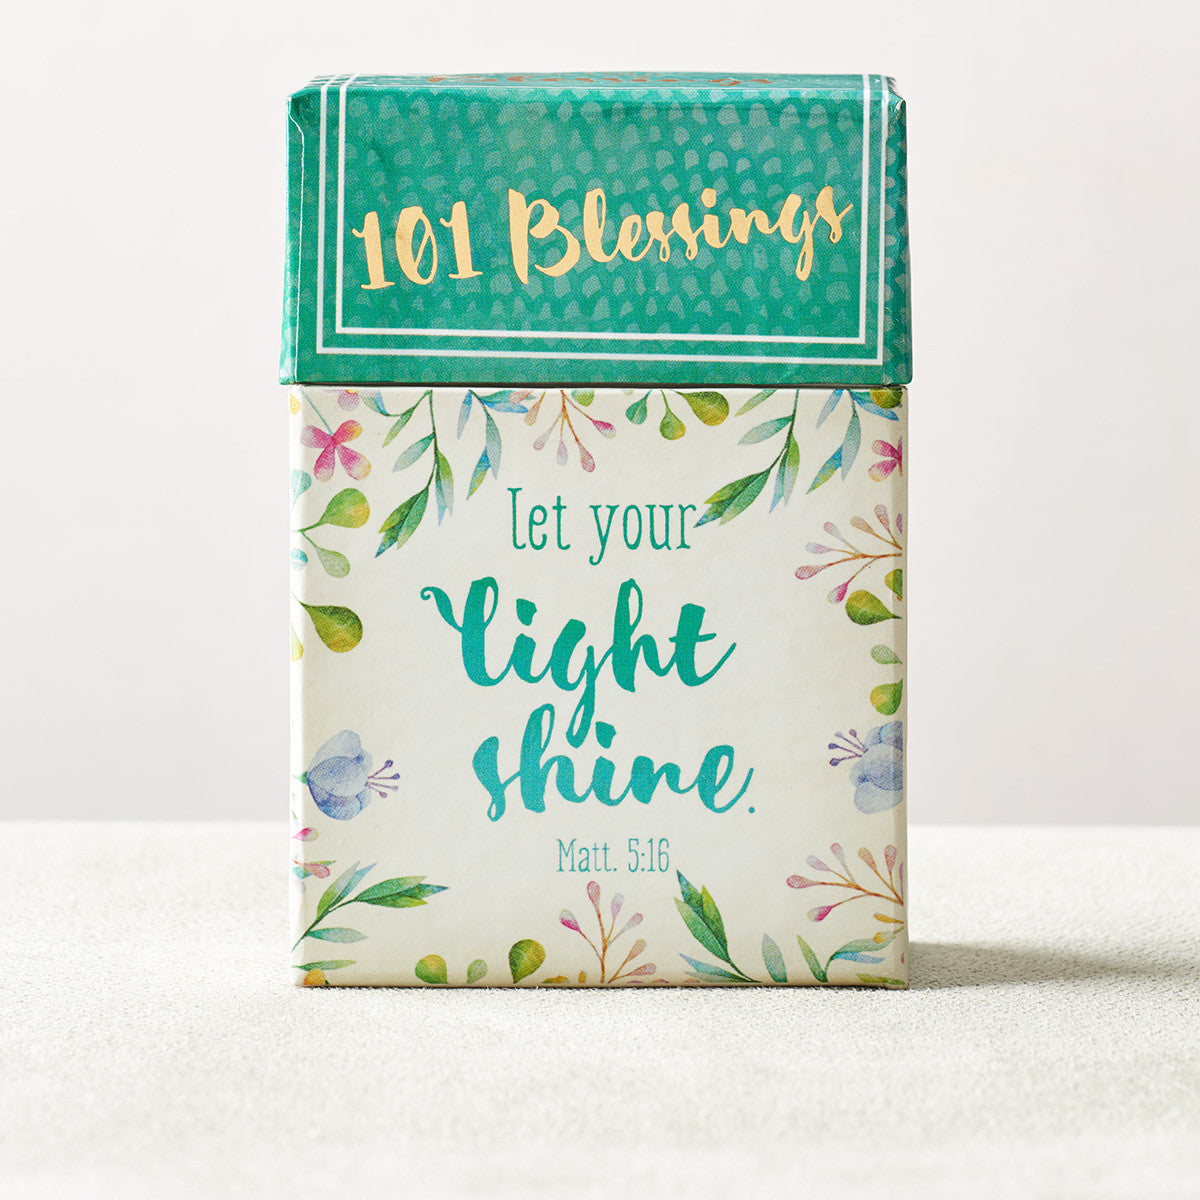 Image of Let Your Light Shine 101 Blessings other